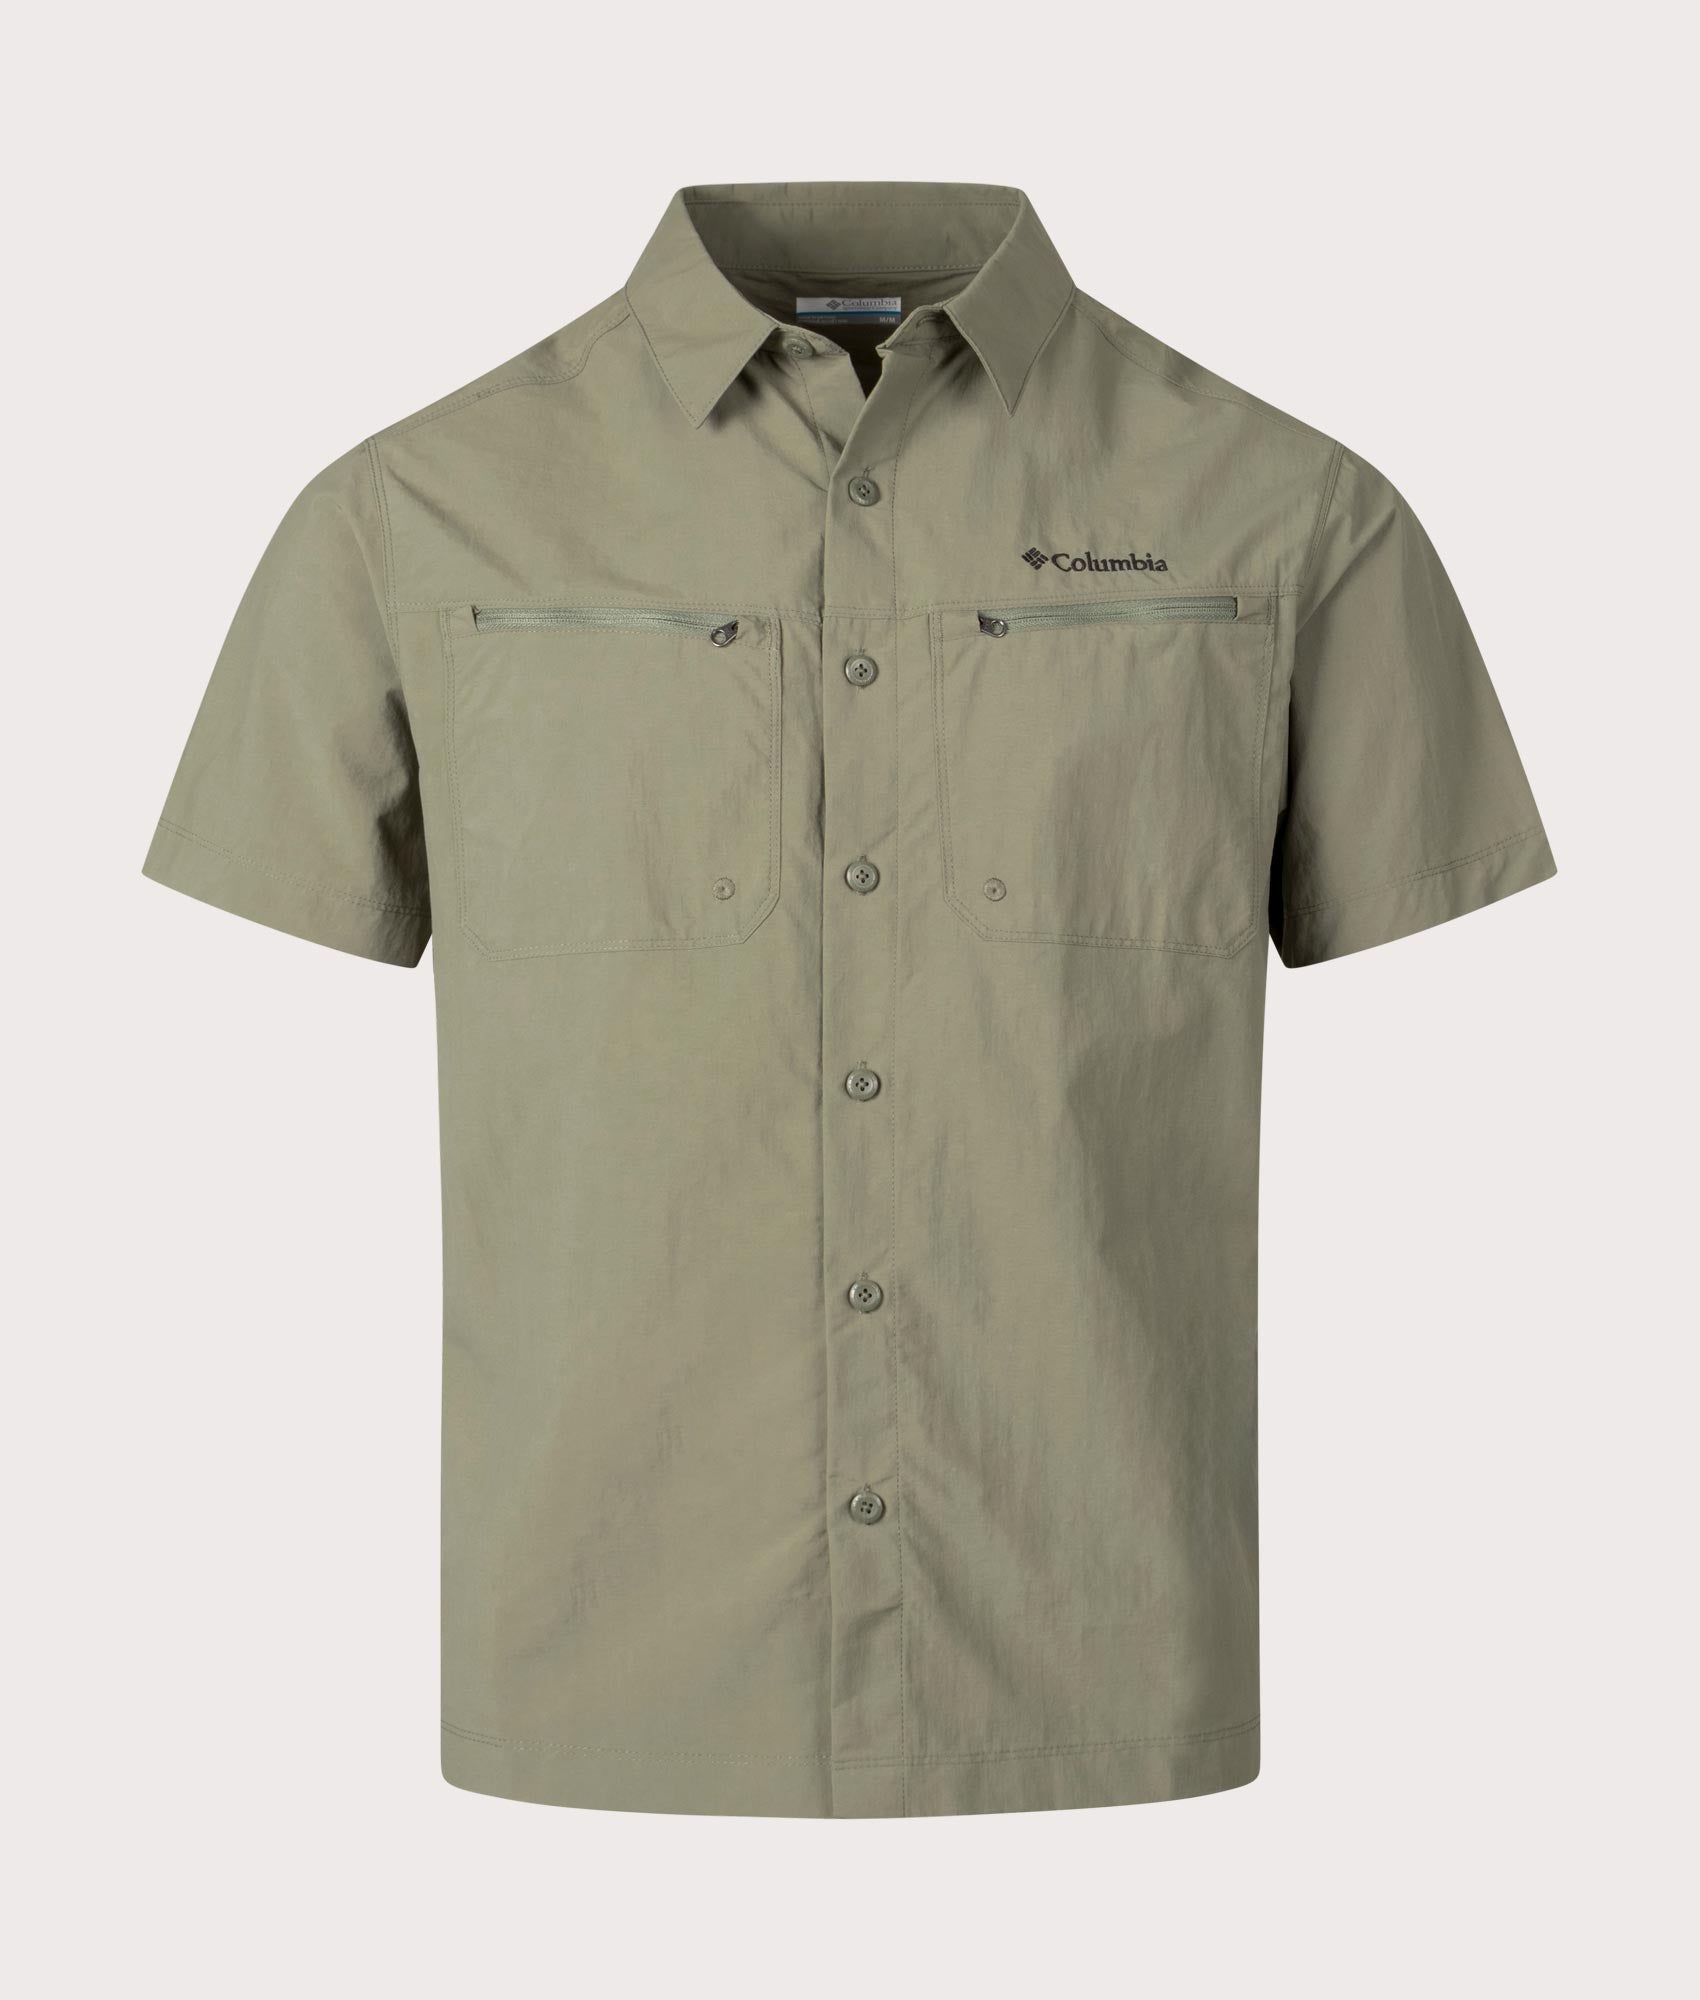 Columbia Mens Mountaindale Outdoor Short Sleeve Shirt - Colour: 397 Stone Green - Size: Large